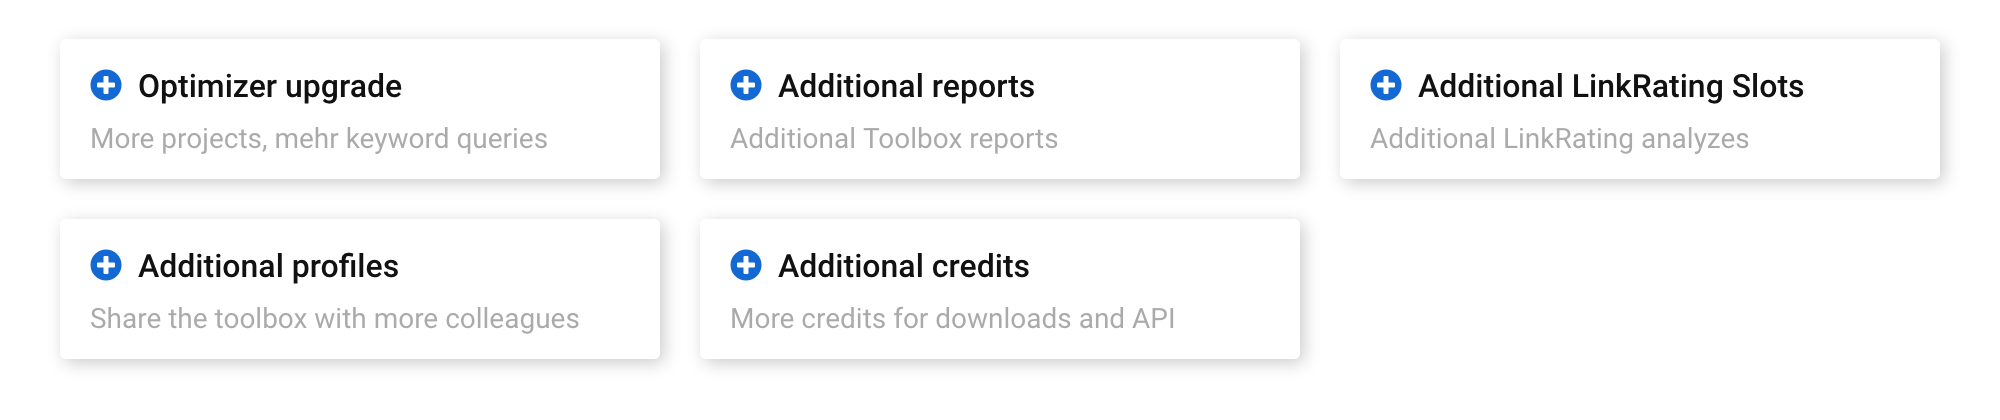 Screenshot of the modul page, with the other upgrade options that are available: optimizer upgrades, additional reports, additional LinkRating slots, additional profiles and additional credits.